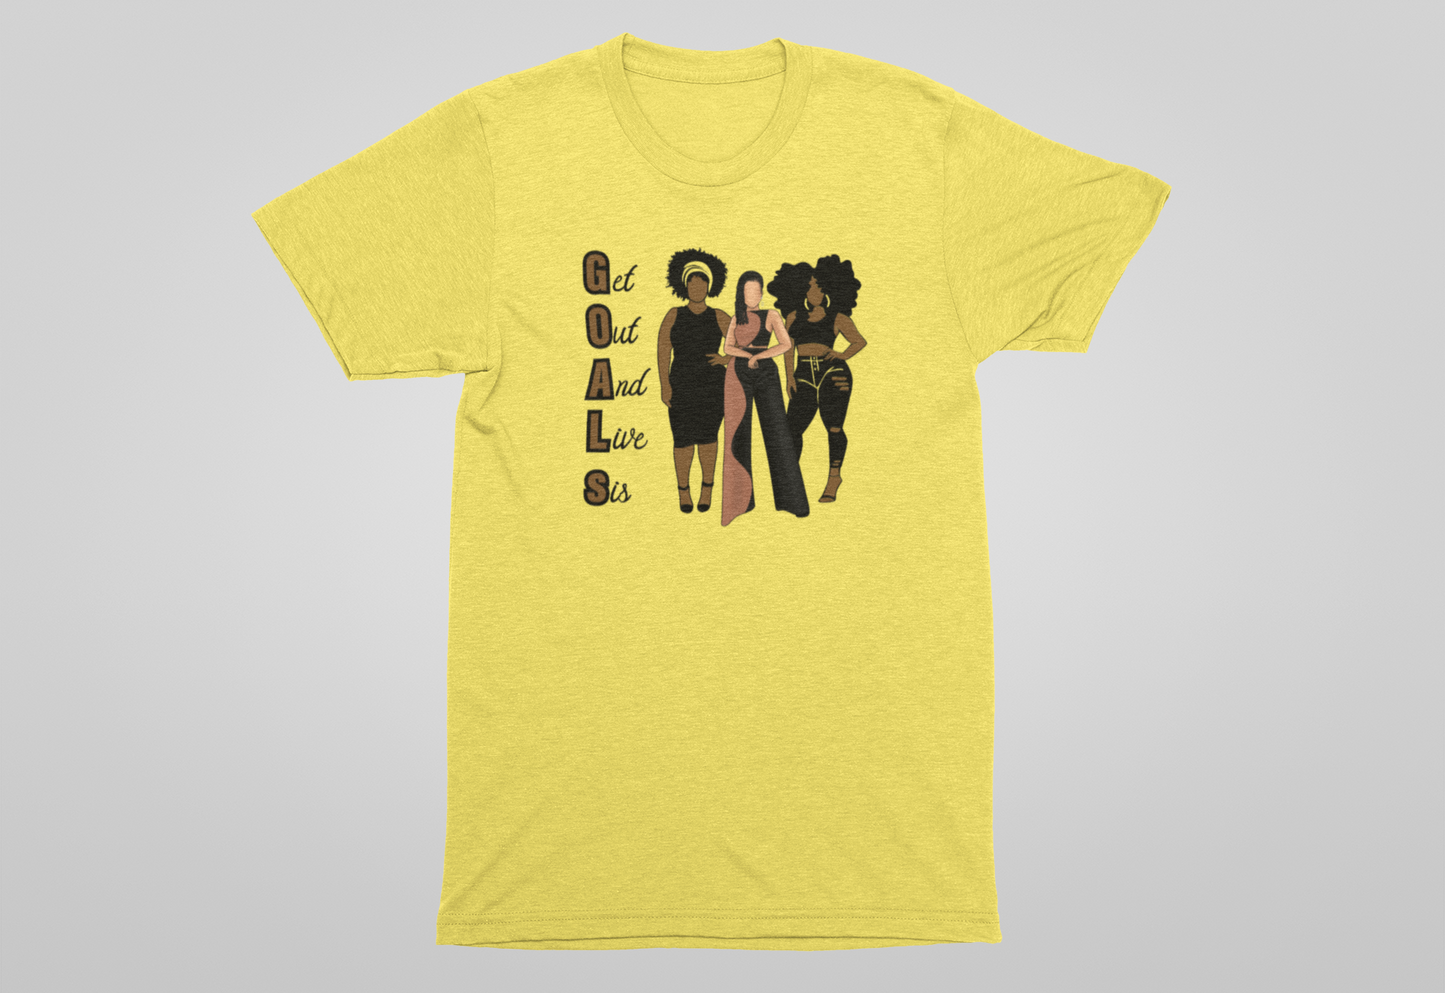 G.O.A.L.S (Get Out And Live Sis) Shirts